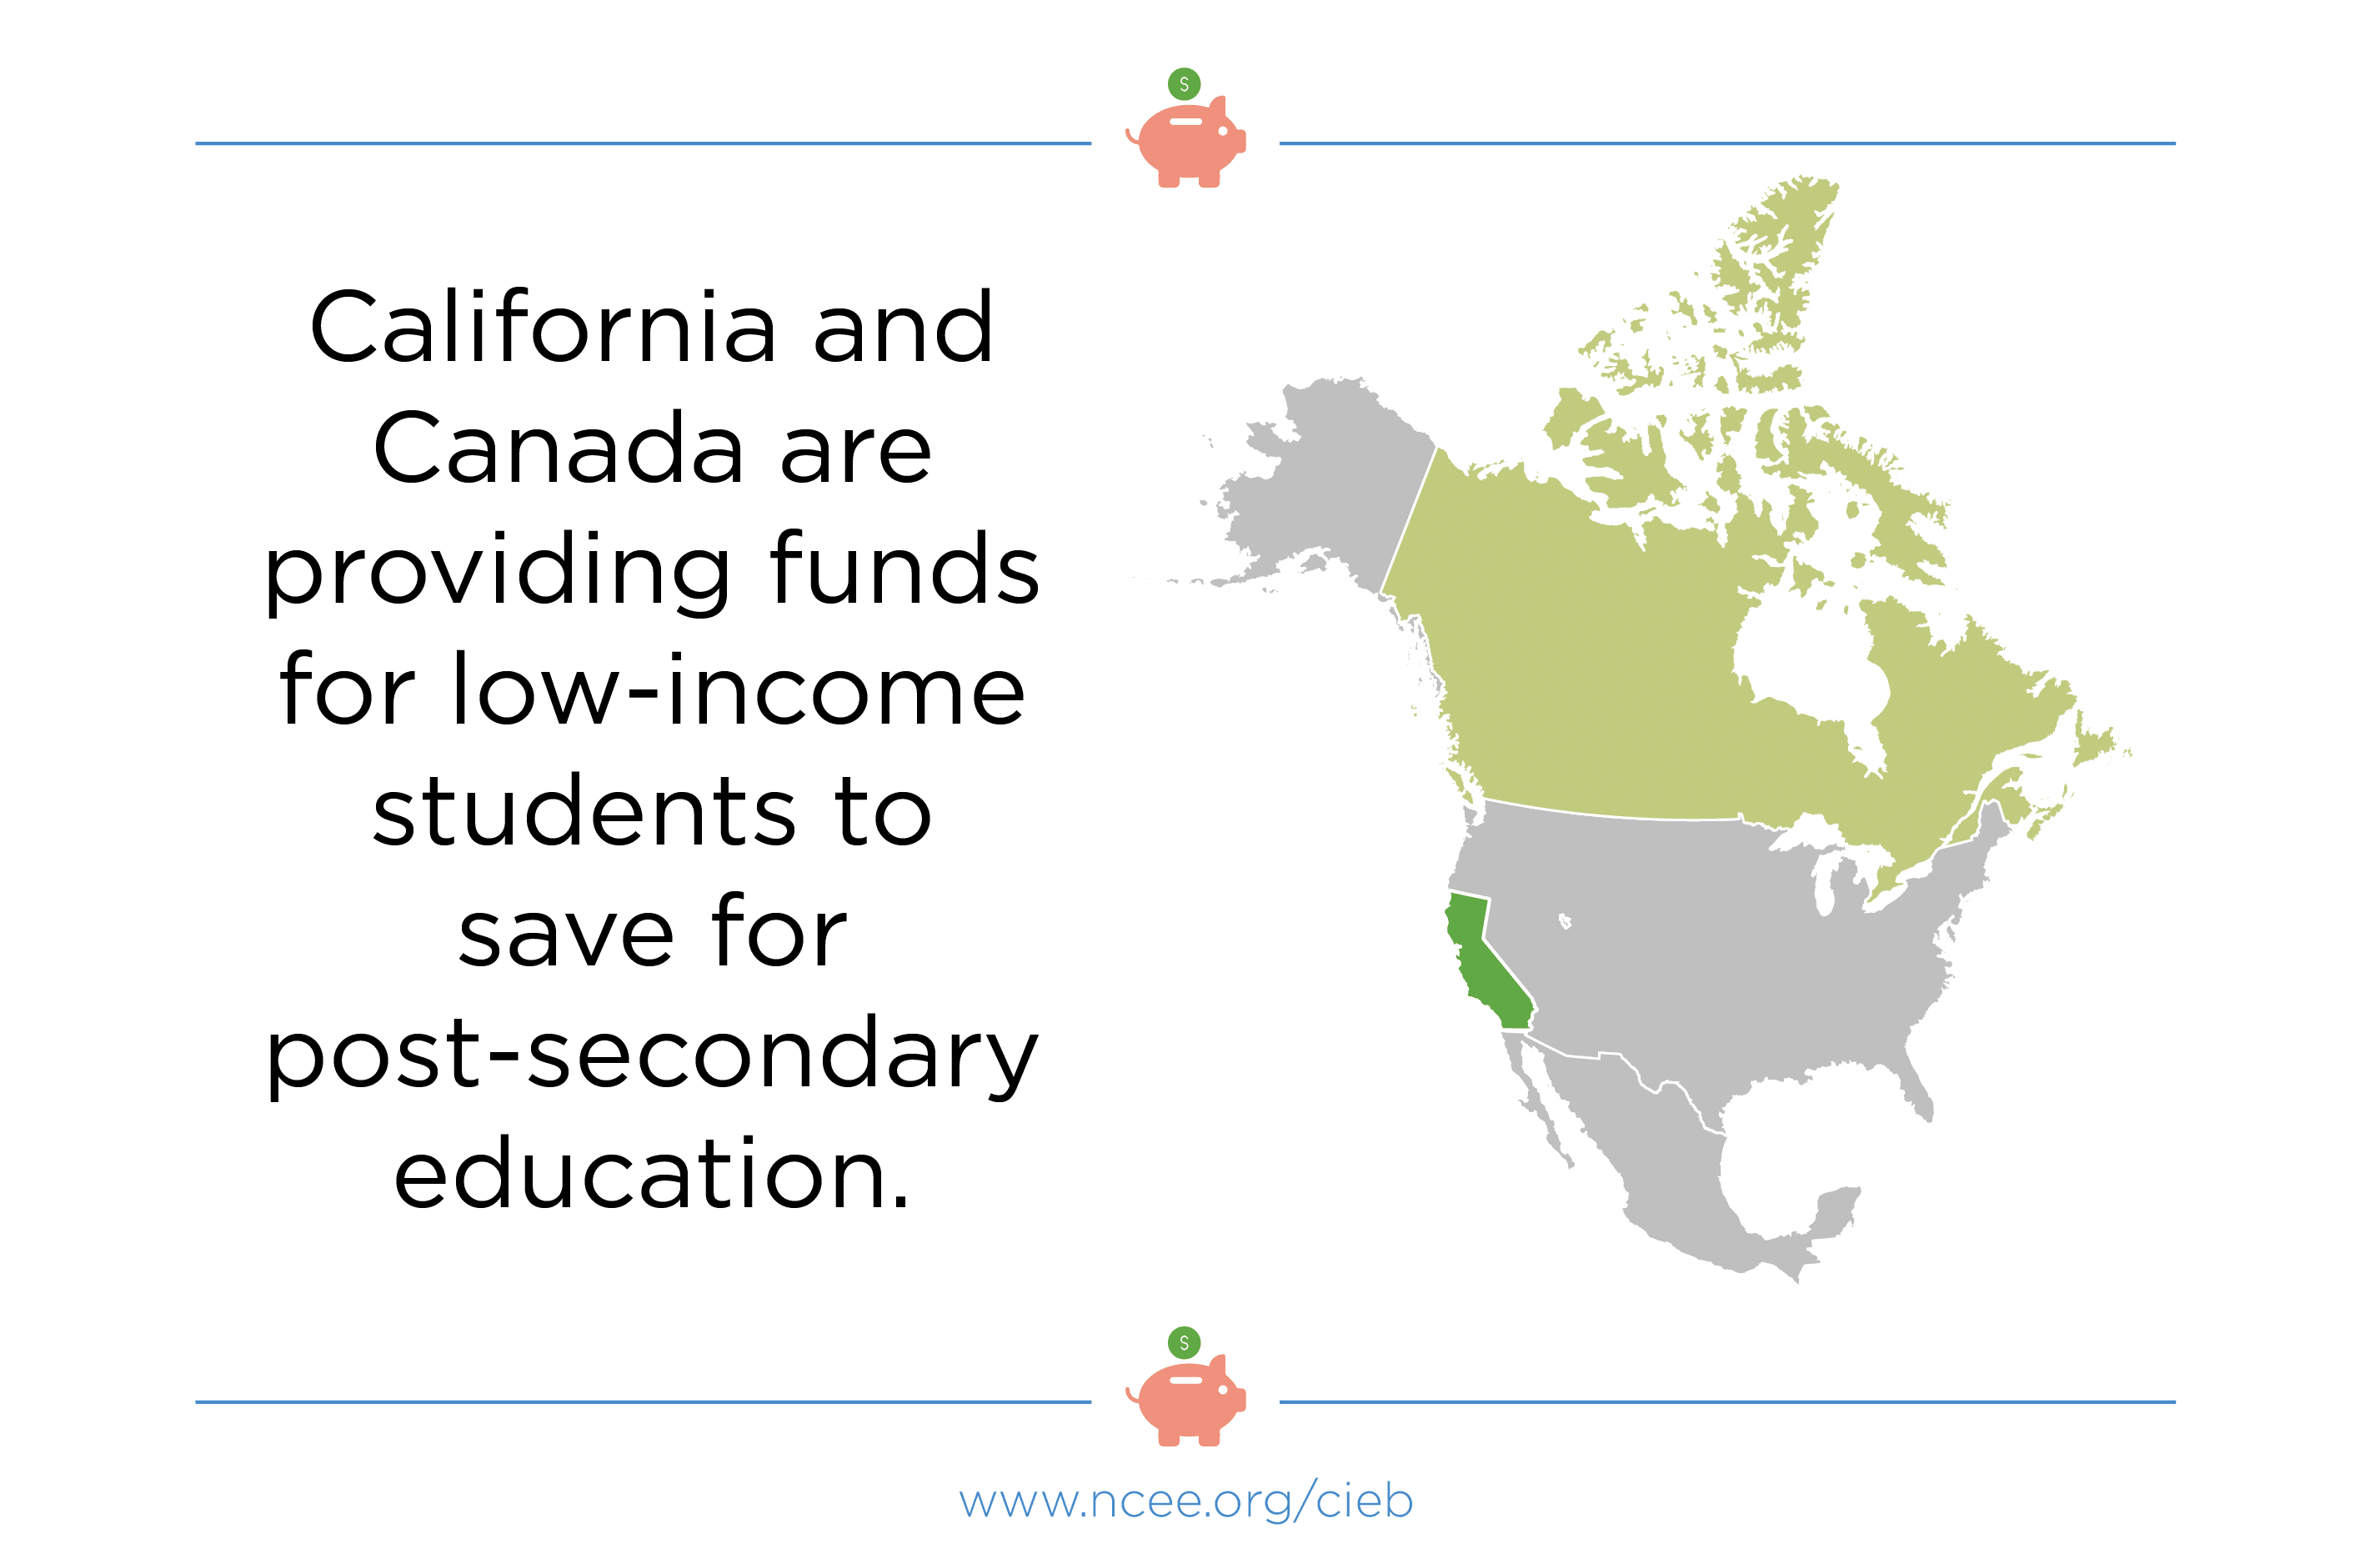 California and Canada are providing funds for low-income students to save for post-secondary education.